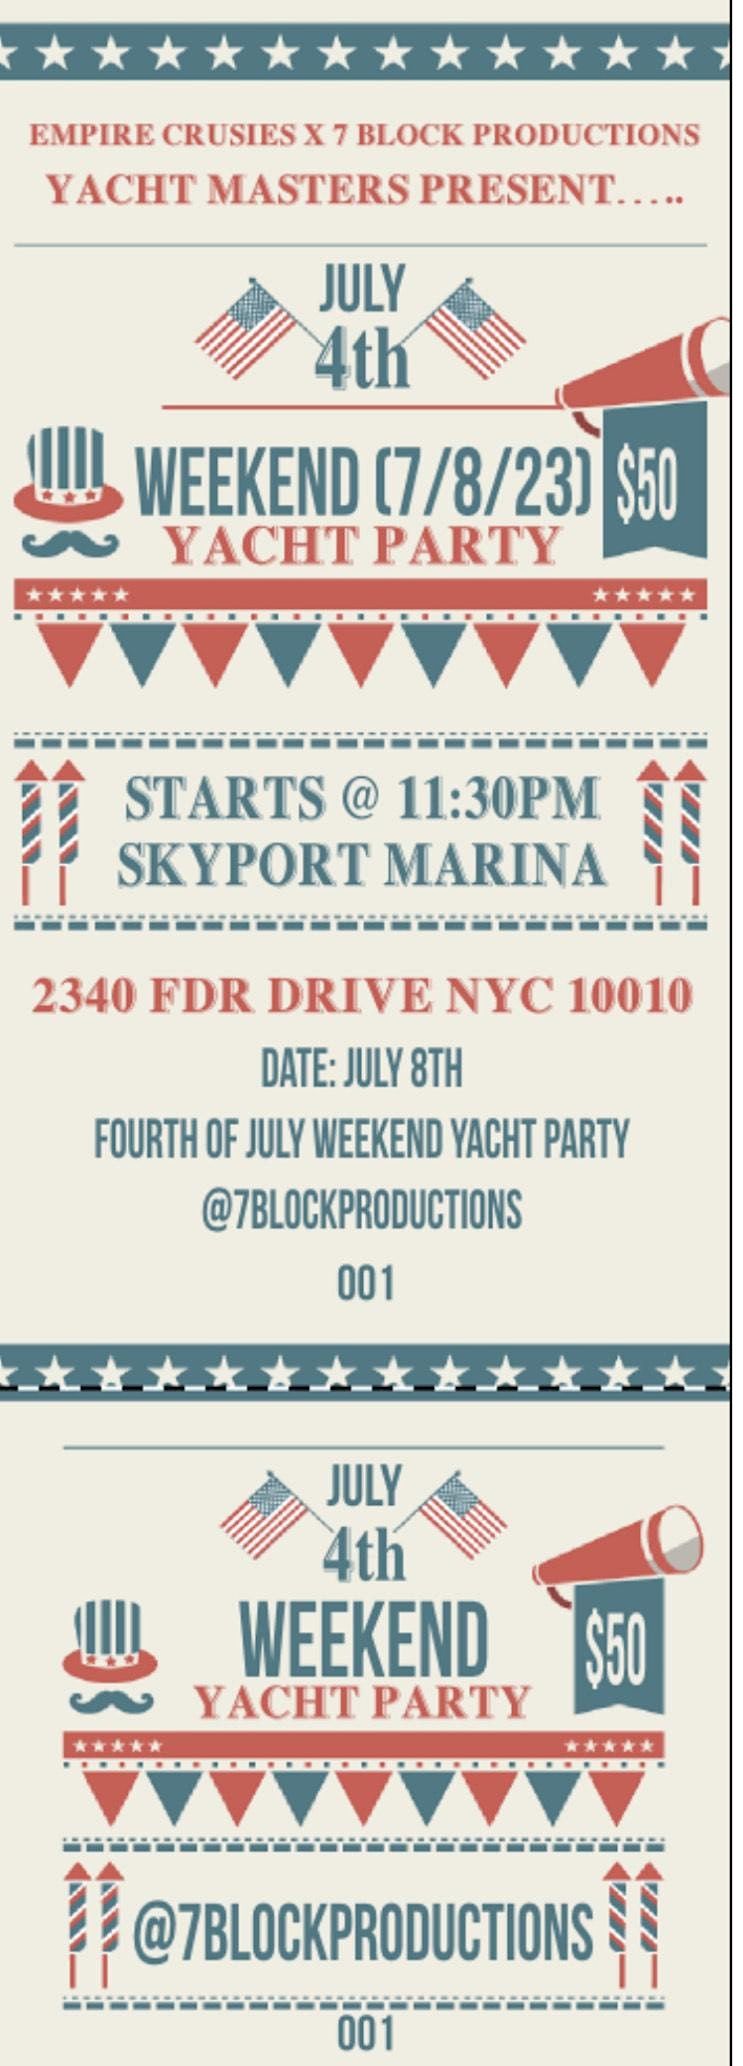 FOURTH OF JULY WEEKEND YACHT PARTY